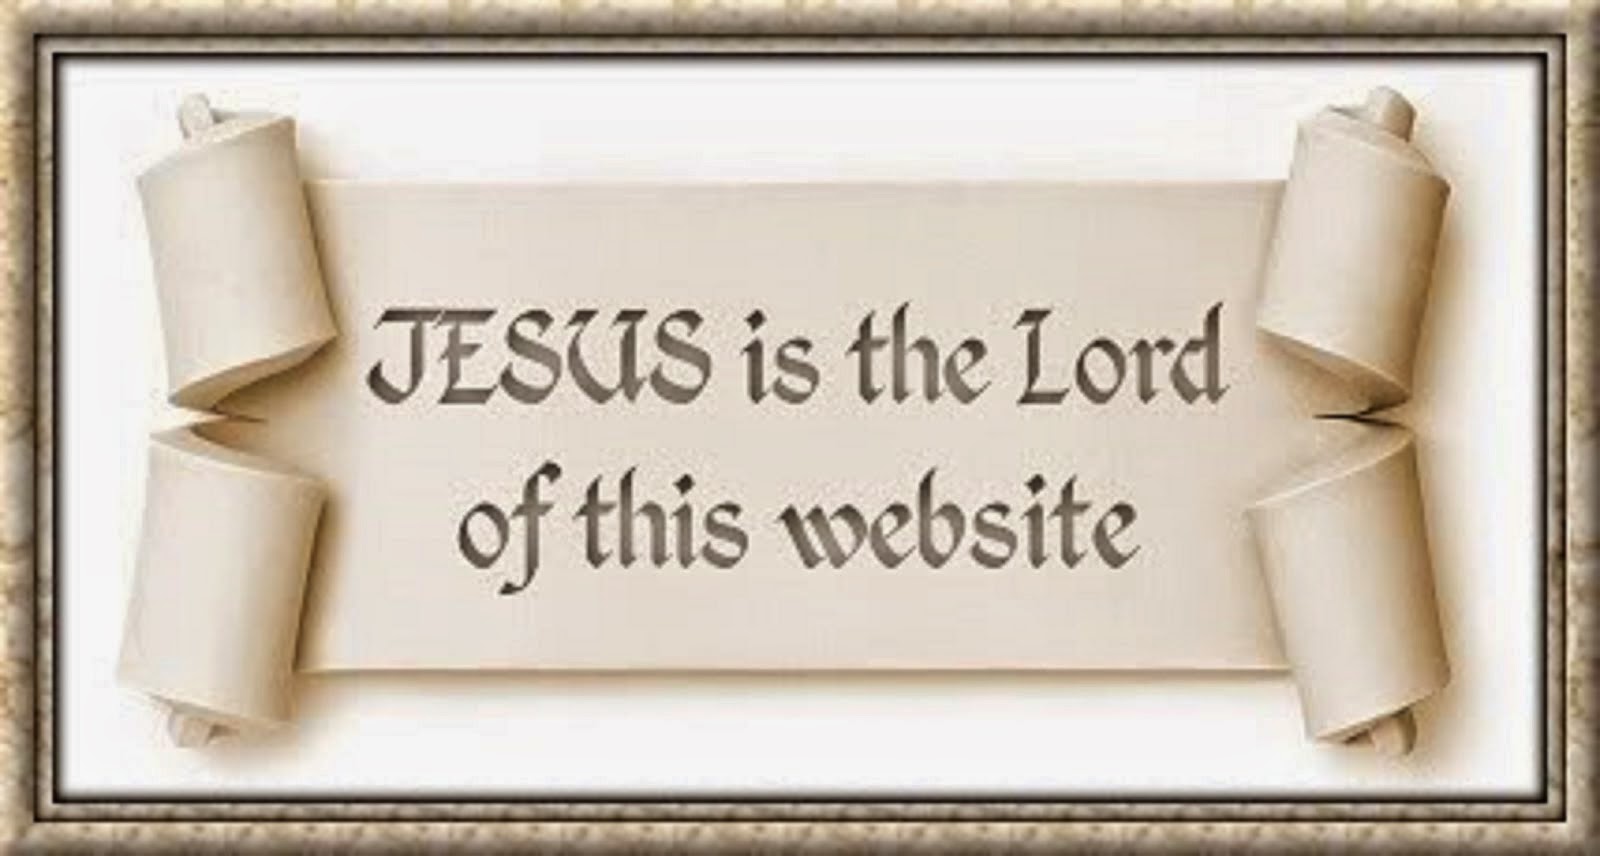 JESUS IS THE LORD OF THIS WEBSSITE